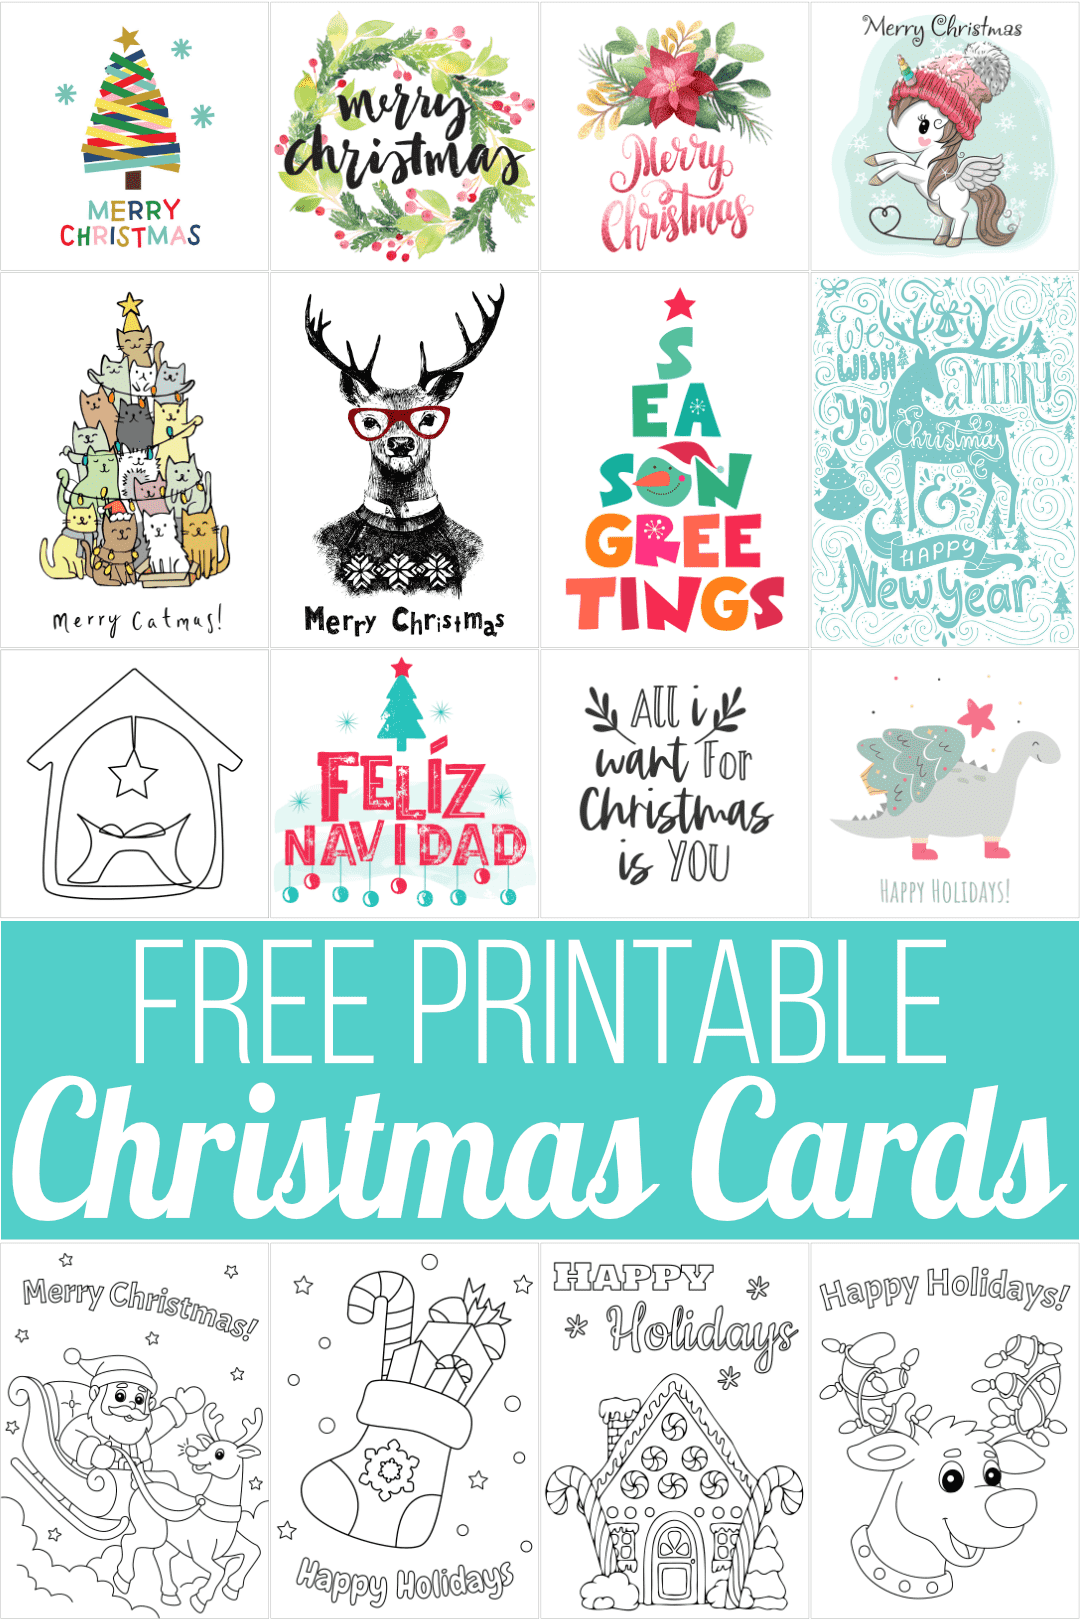 21 Free Printable Christmas Cards for 21 With Free Templates For Cards Print